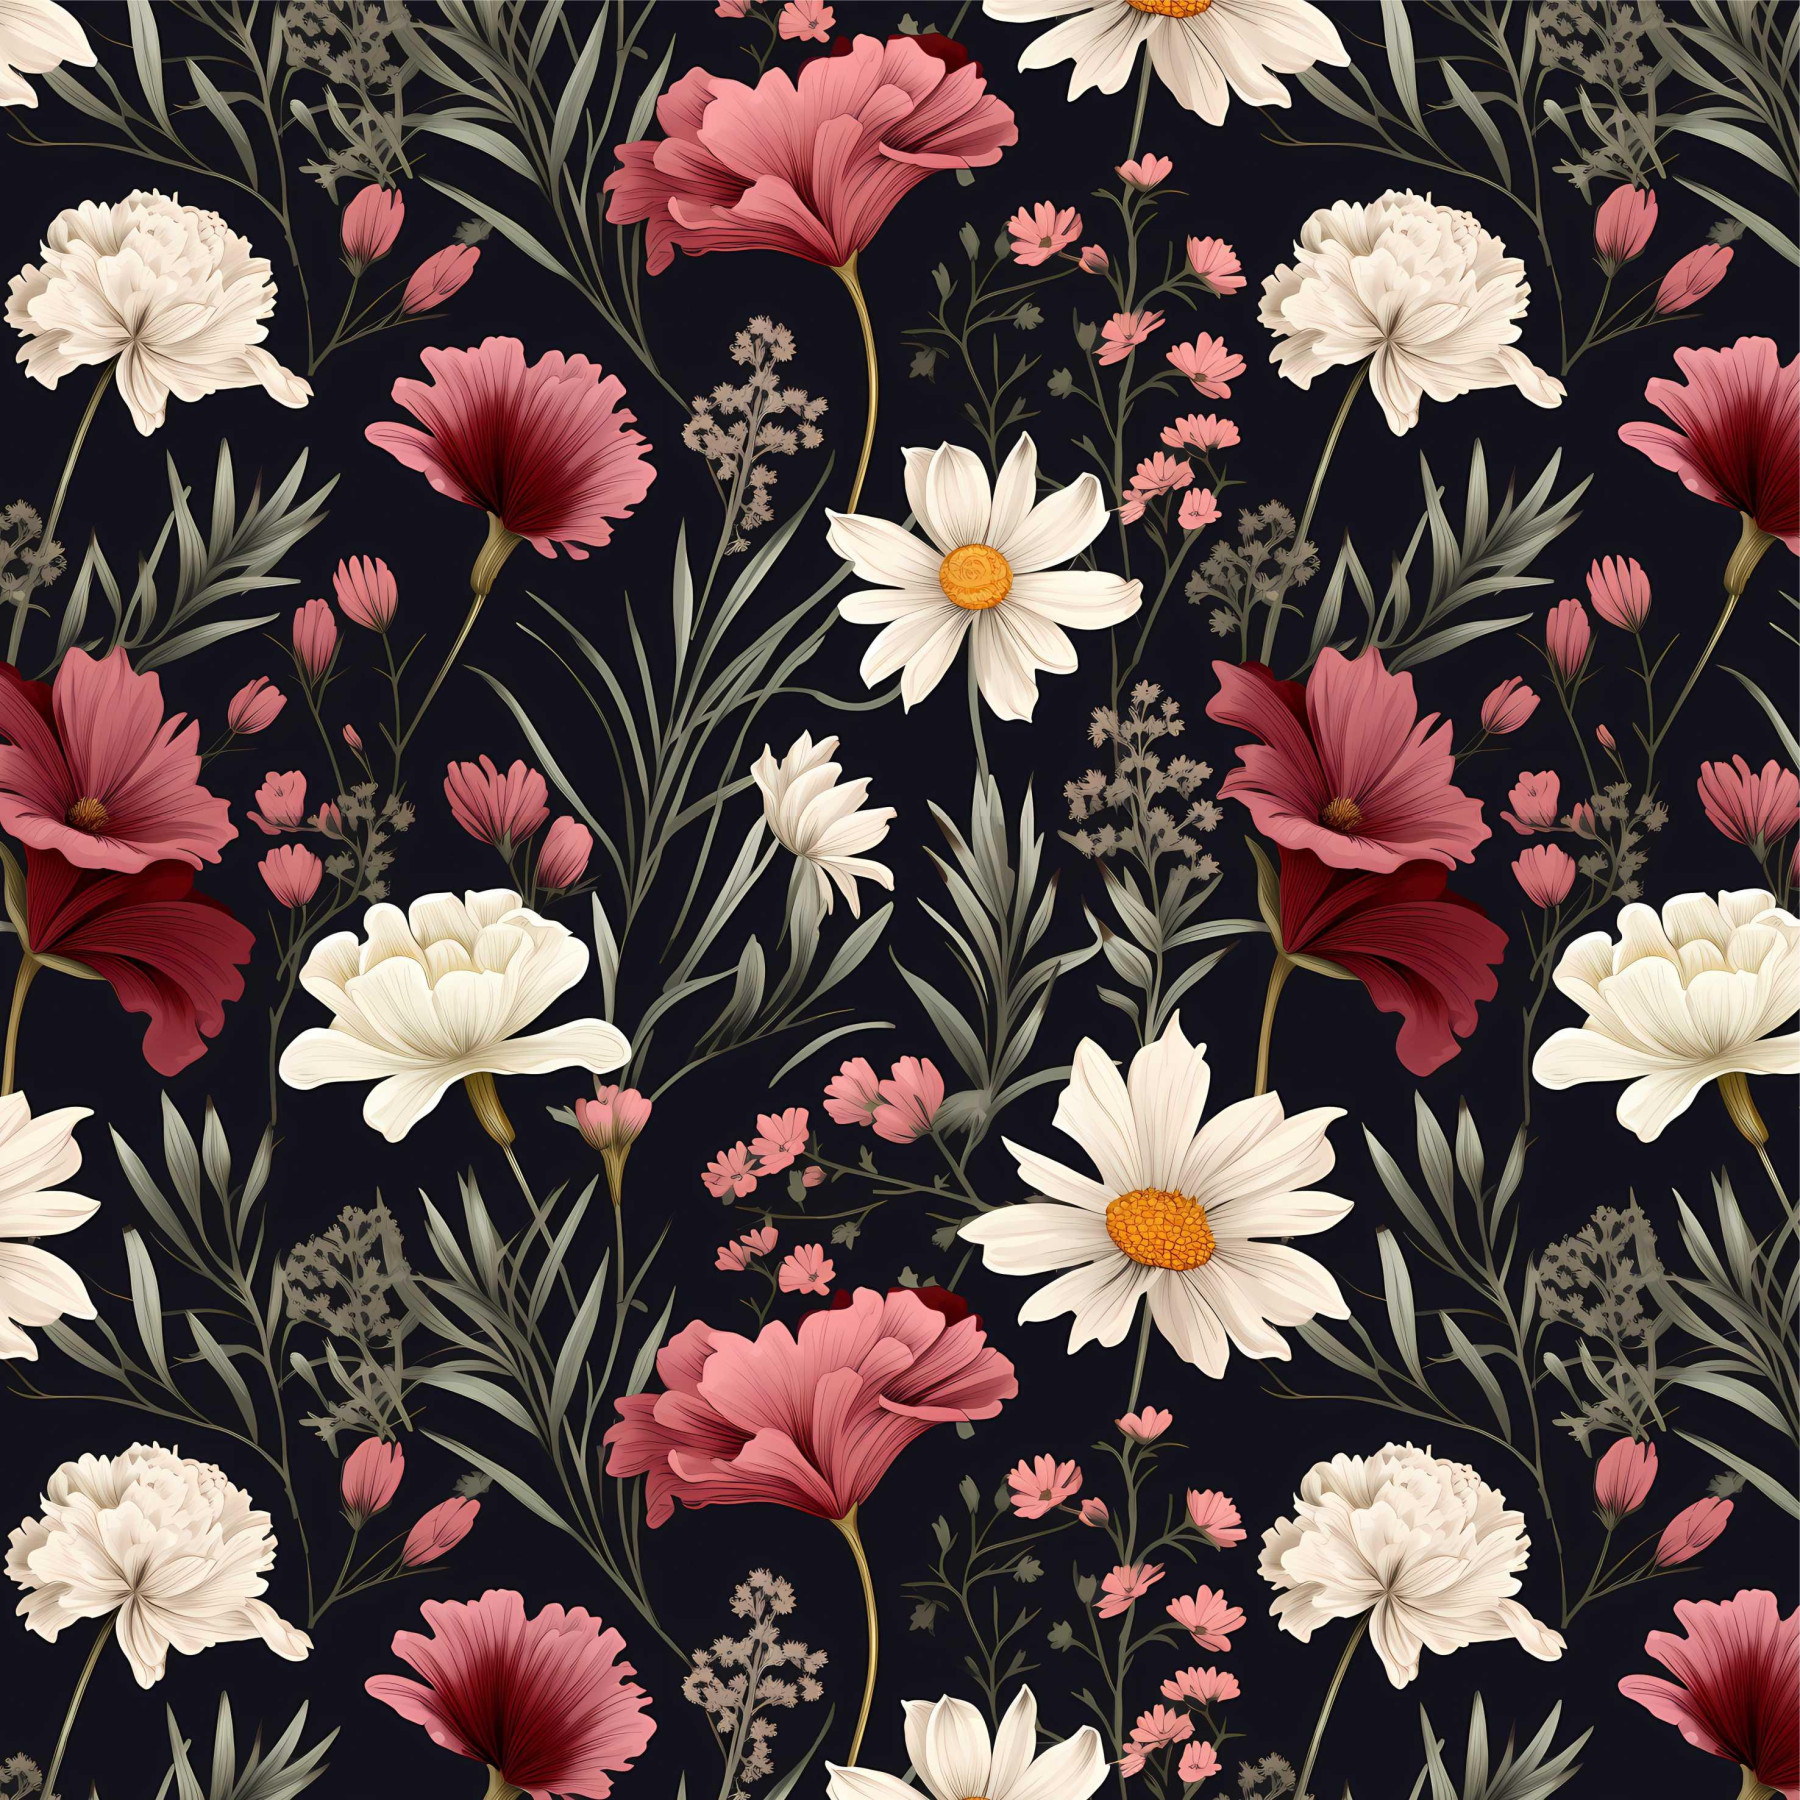 FLOWERS wz.7 - Woven Fabric for tablecloths